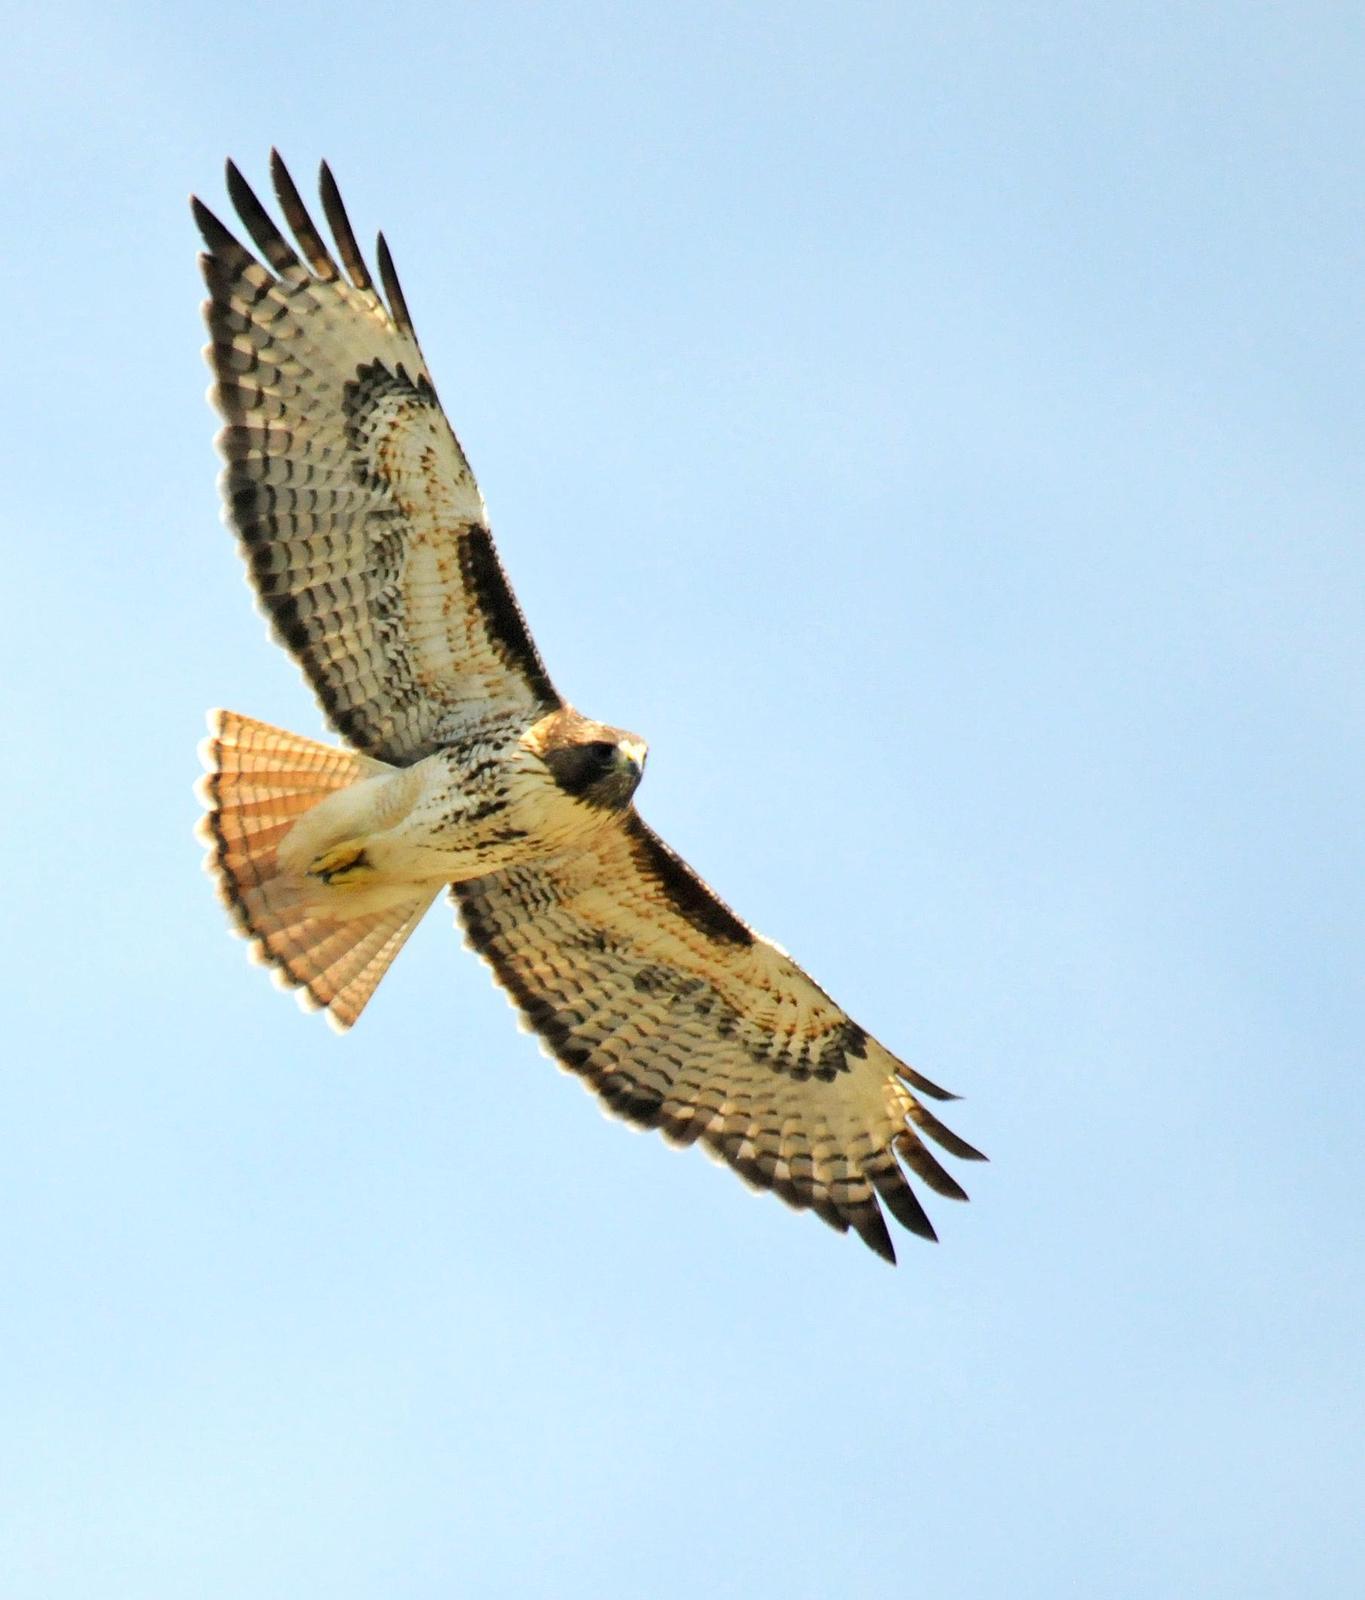 Red-tailed Hawk (calurus/alascensis) Photo by Steven Mlodinow